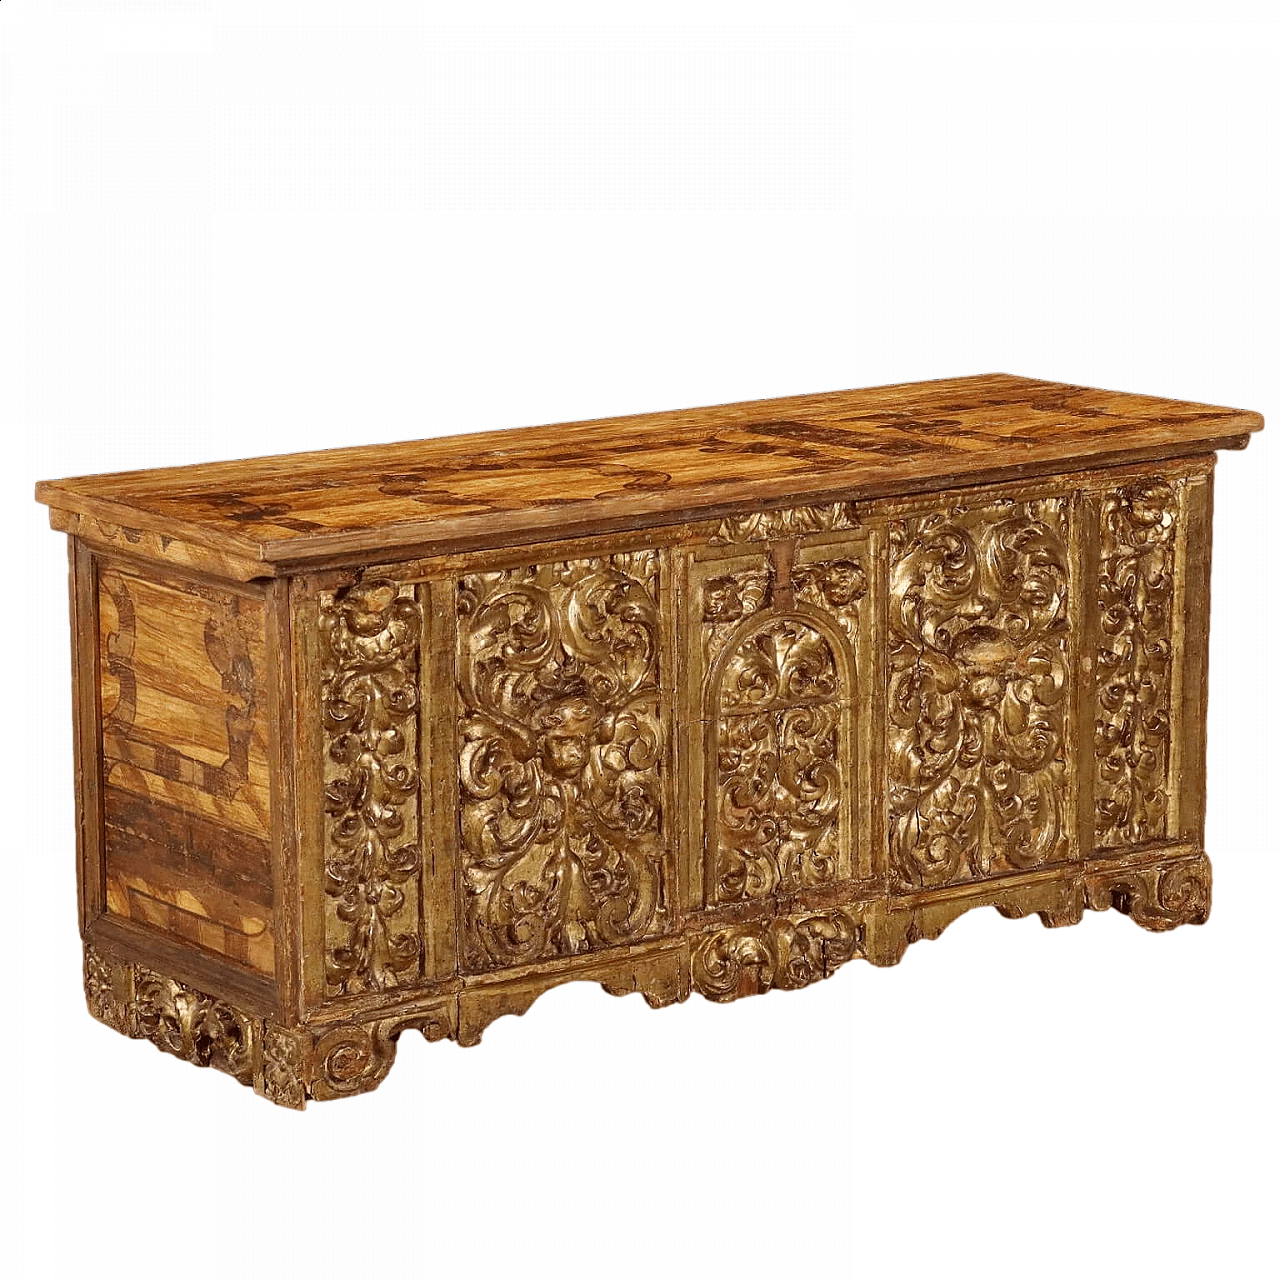 Carved and gilded wooden chest, 17th century 11